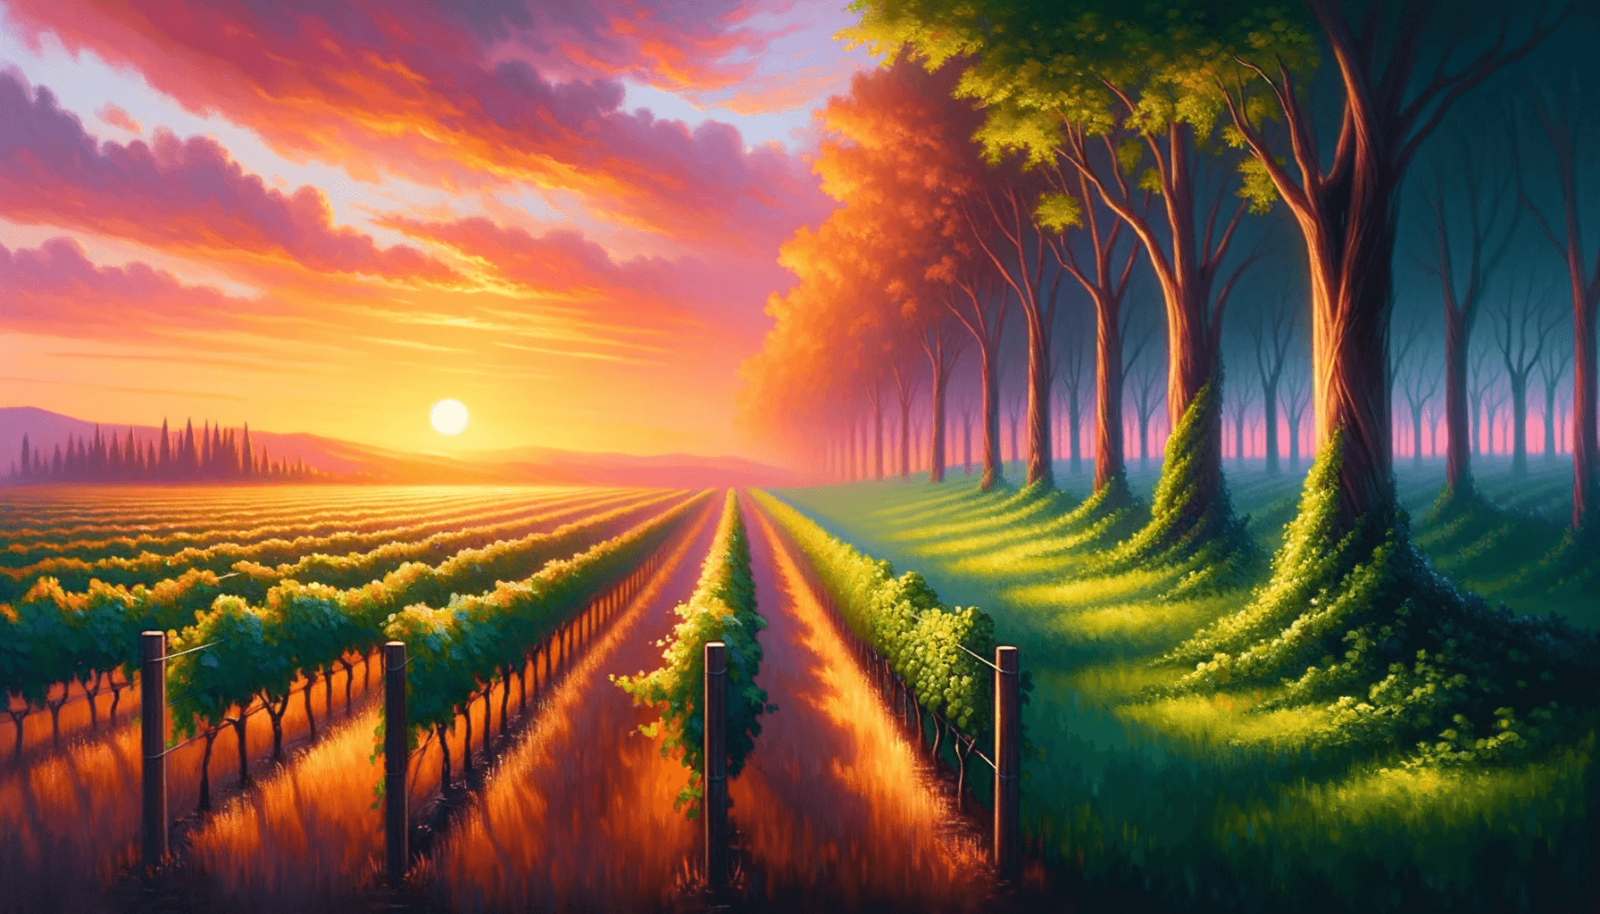 Oil painting. A picturesque vineyard during sunset with the orange and pink hues of the sky reflecting on the grapevines. As the scene extends, the vineyard subtly transforms into a verdant forest.